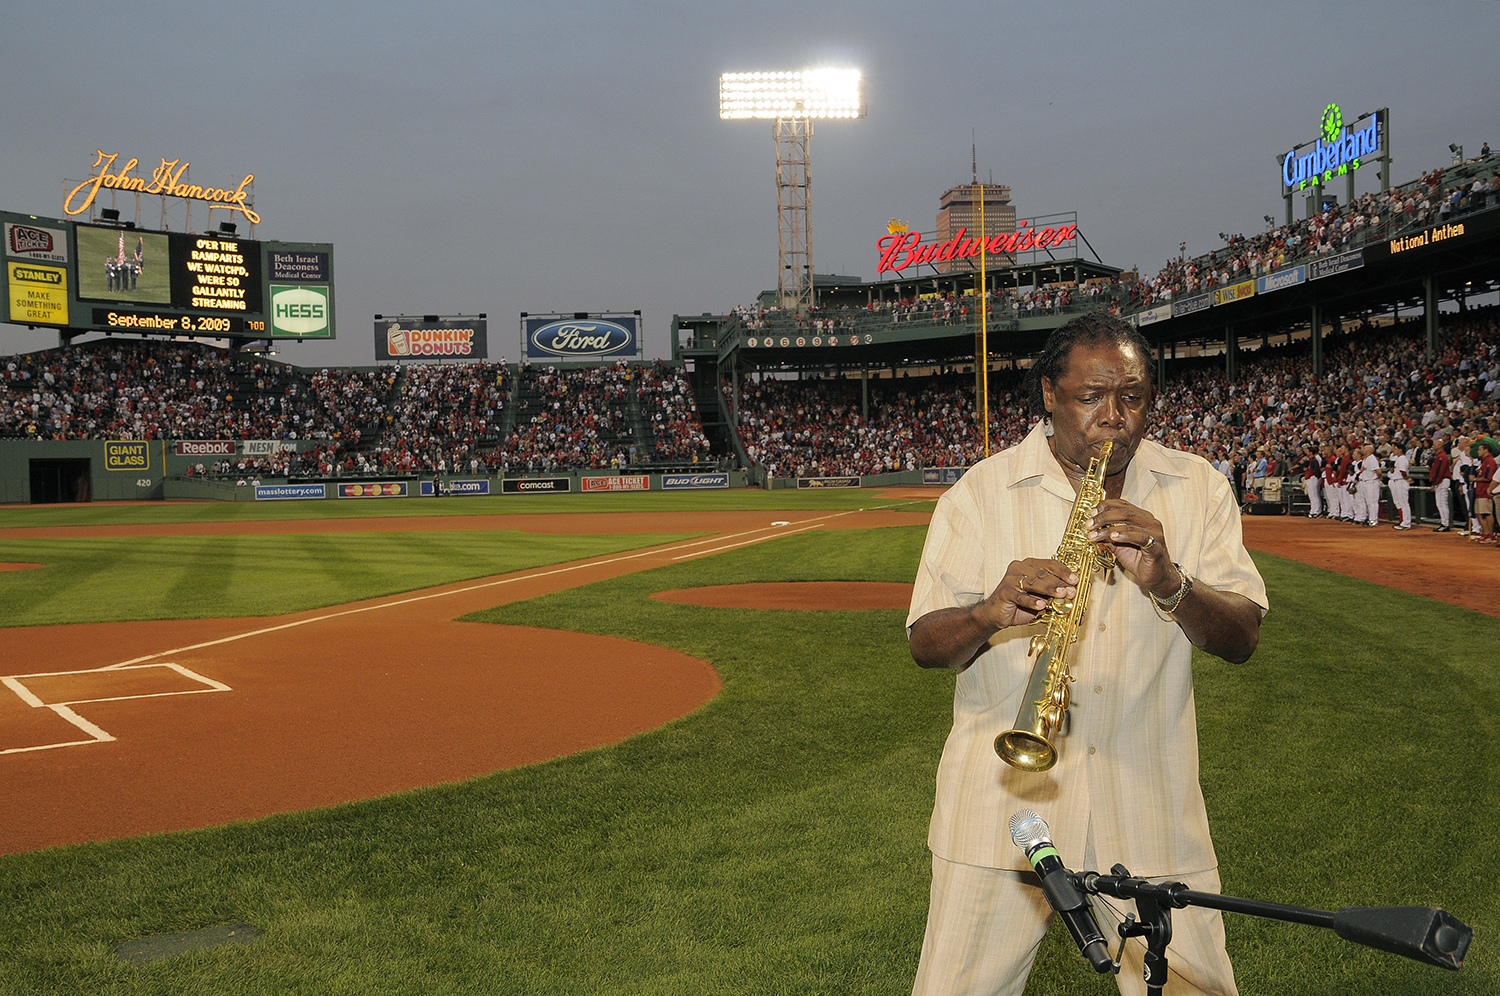 Wendall at Fenway Park